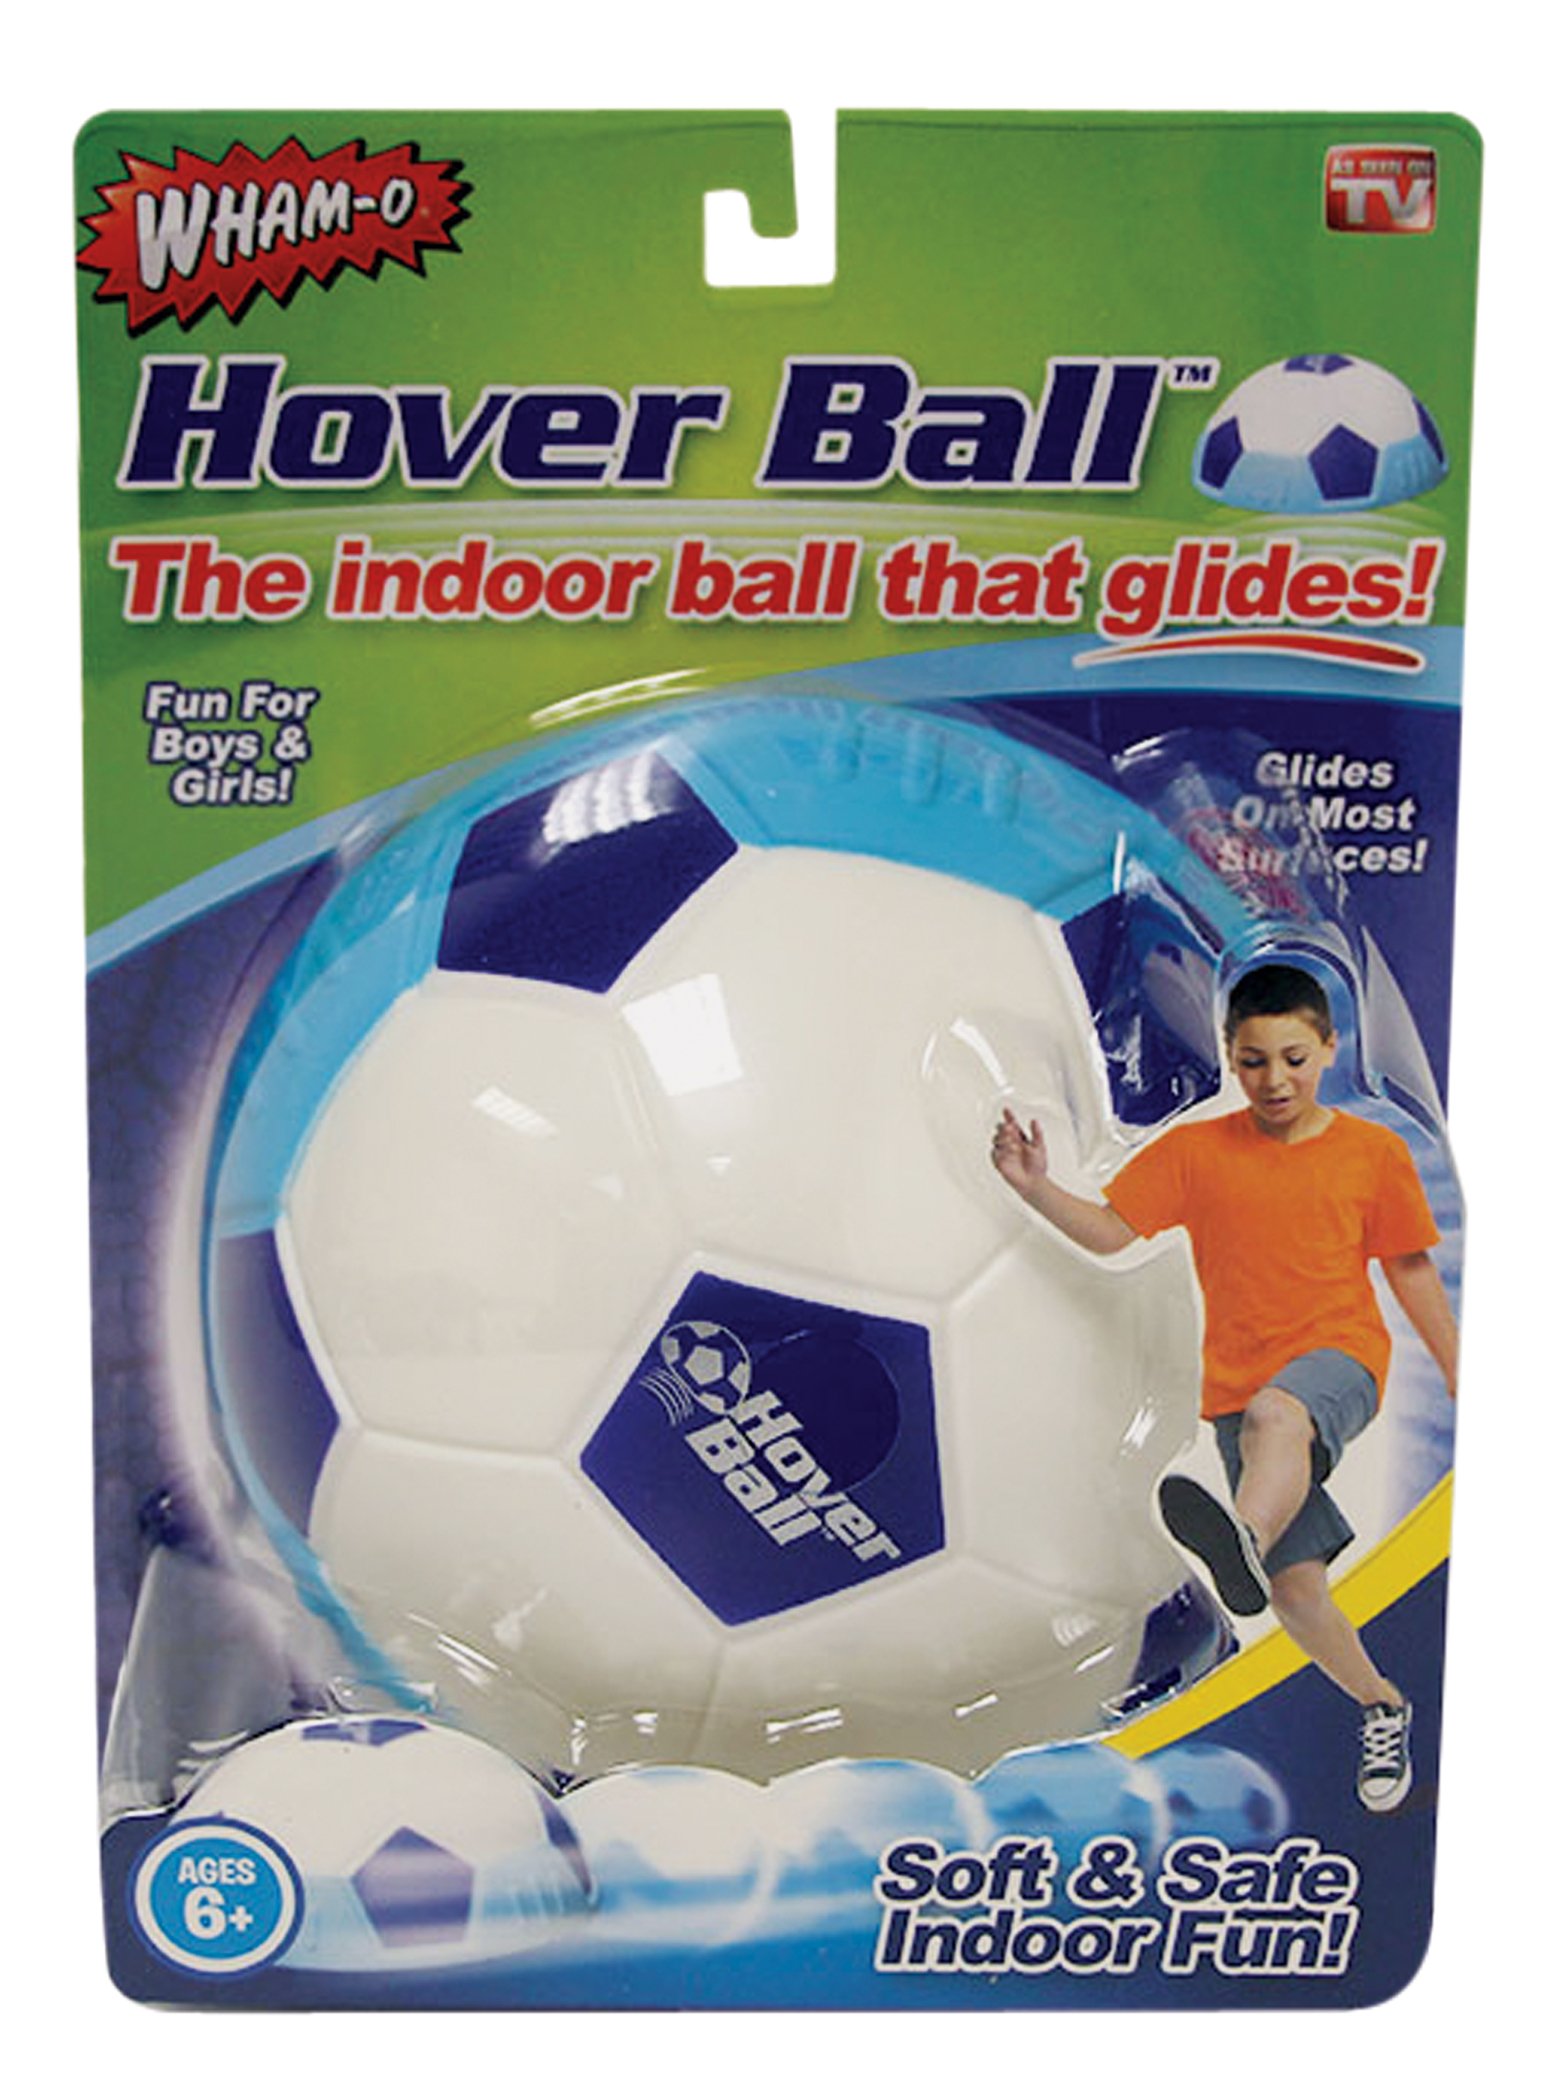 As Seen on TV Wham-O Hover Ball The Indoor Ball that Glides (Ages 6+)